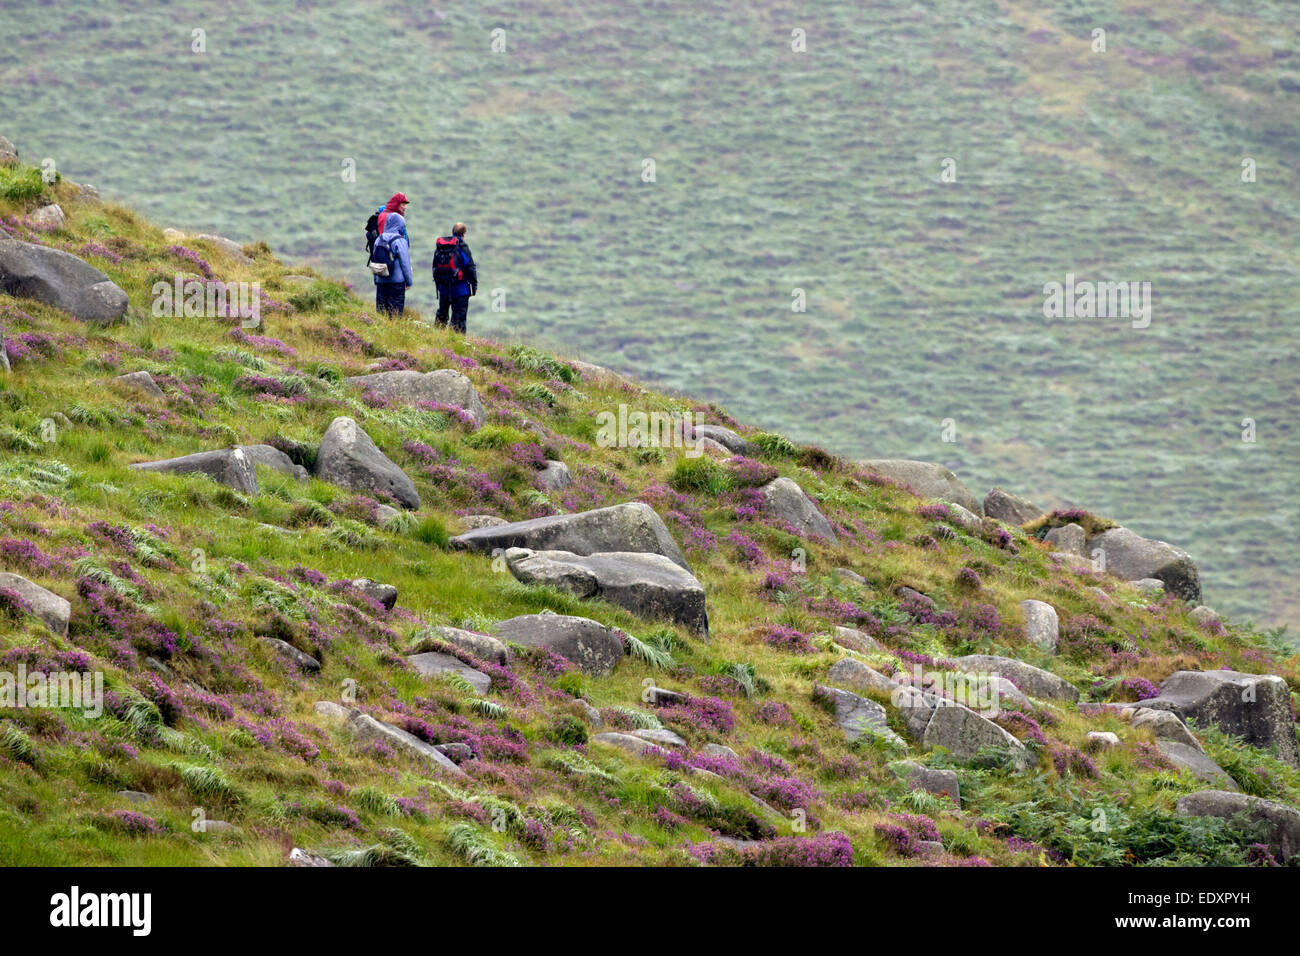 hillwalkers out walking on damp day on an irish mountain in the mournes Stock Photo